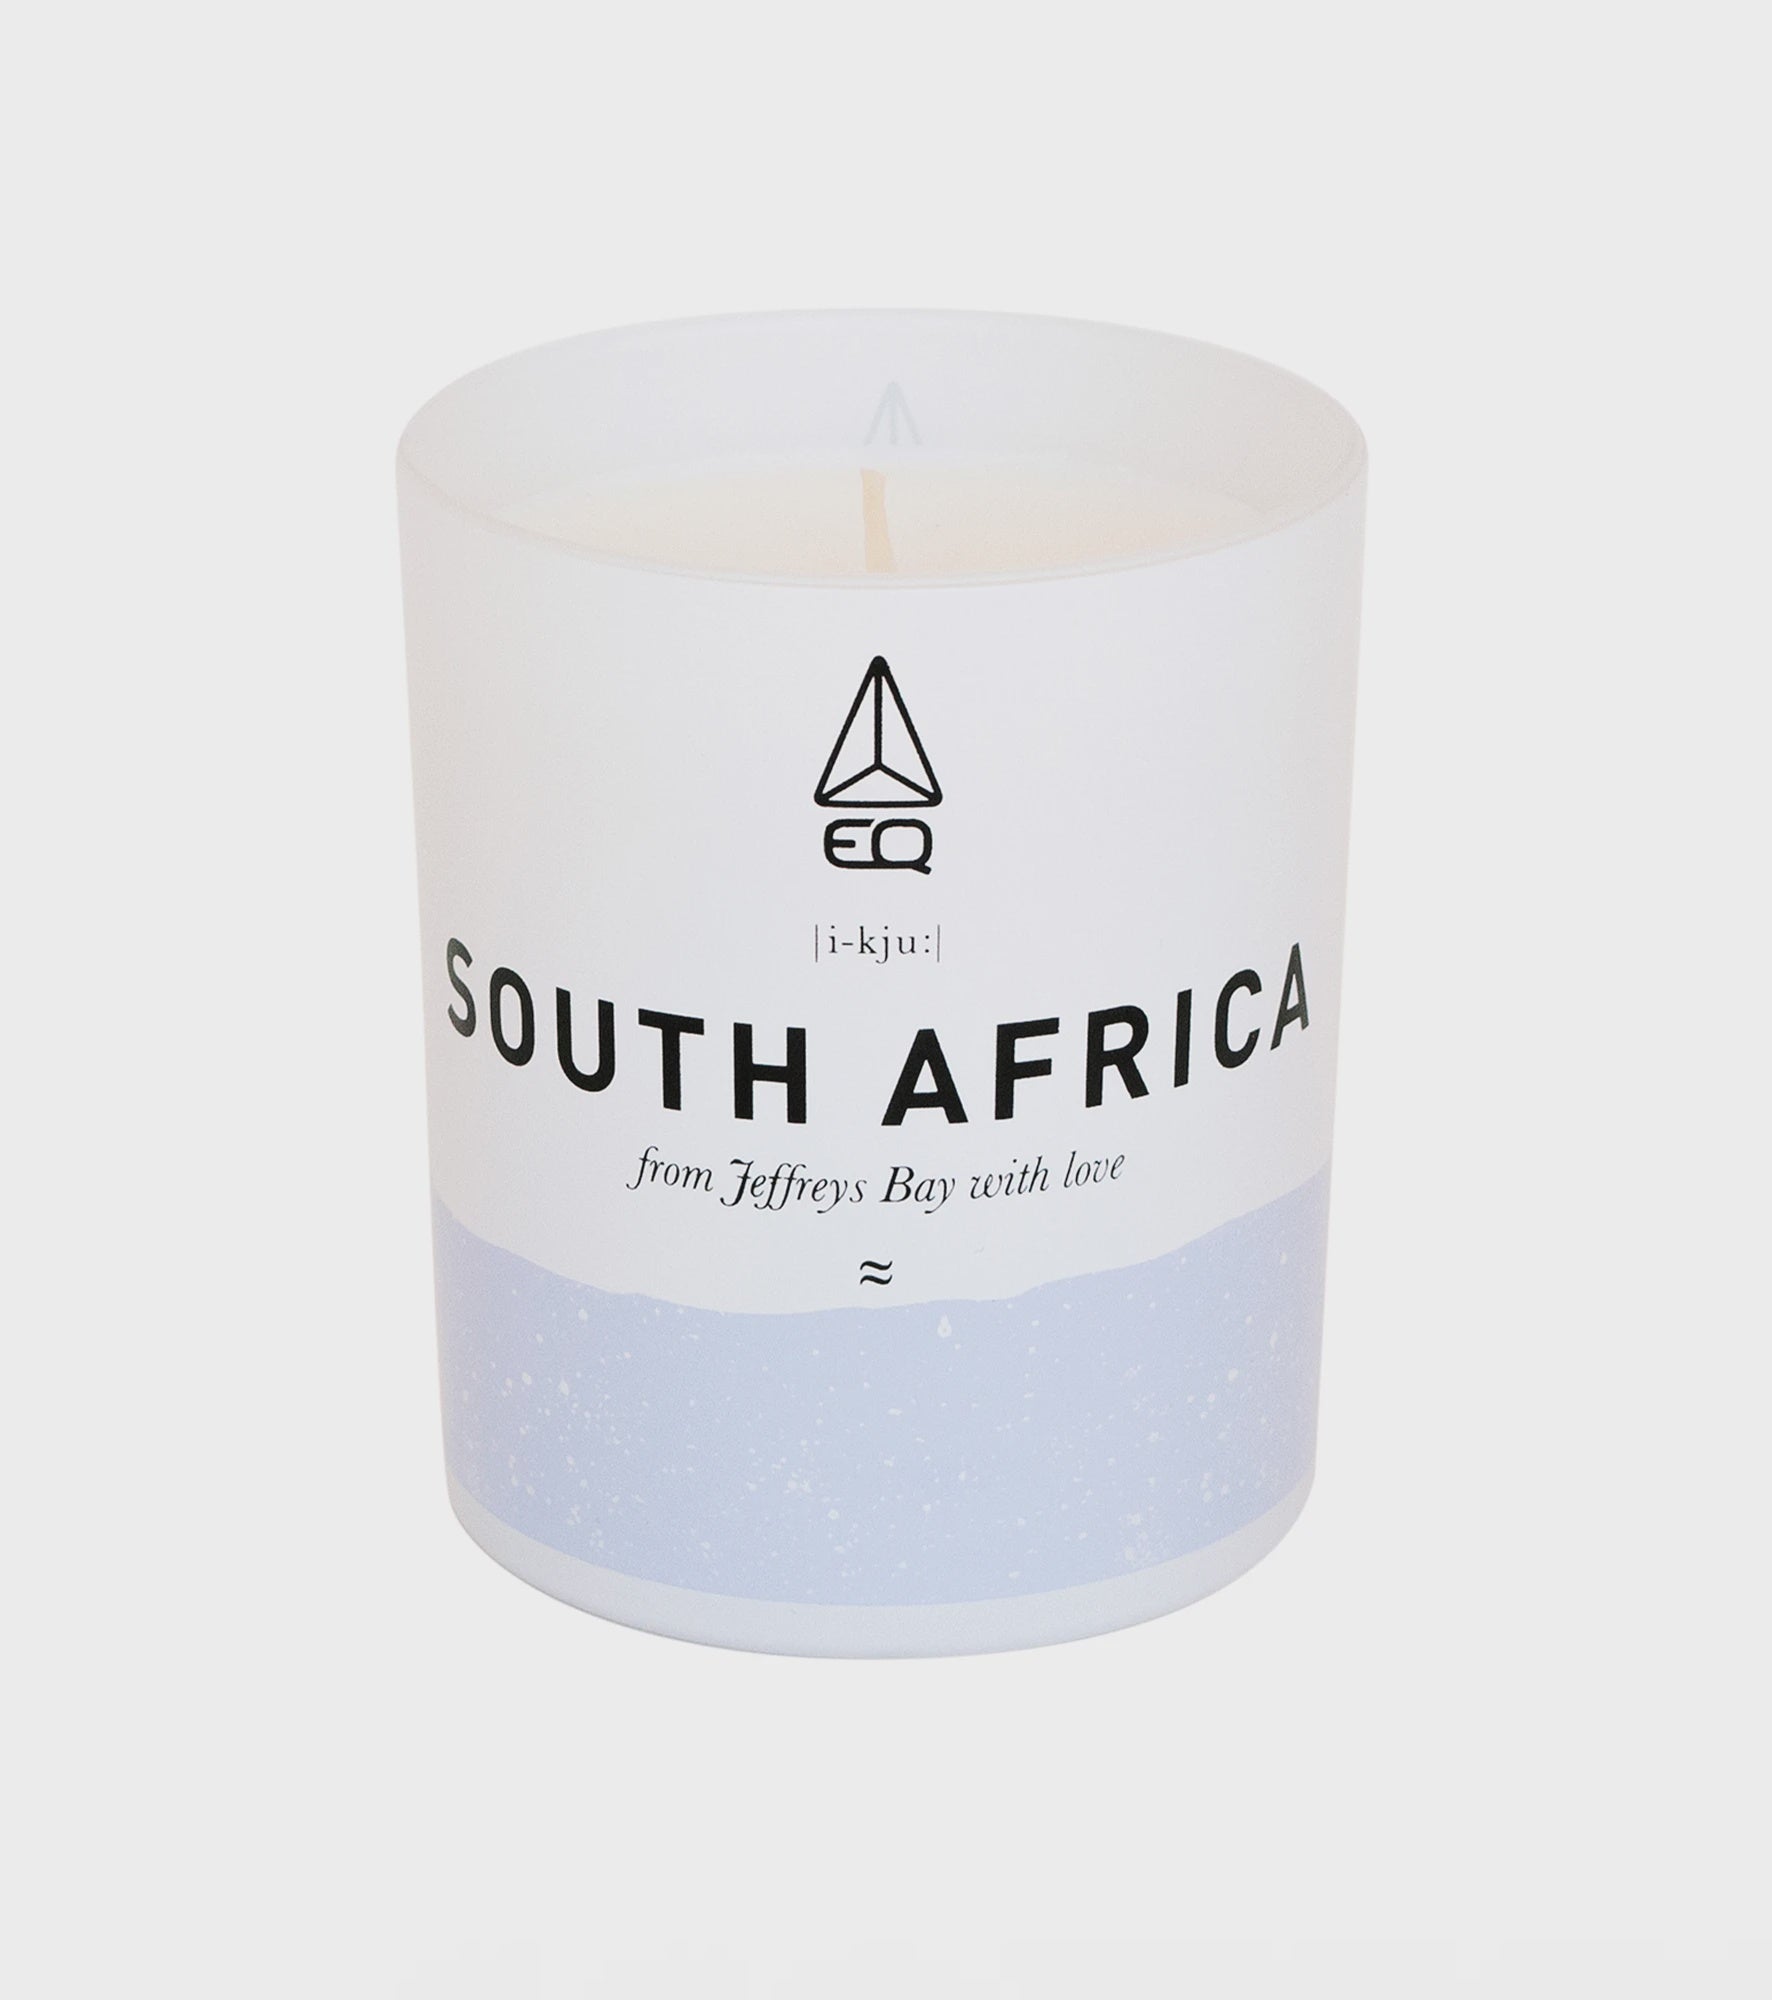 EQ Natural Scented Candle – South Africa